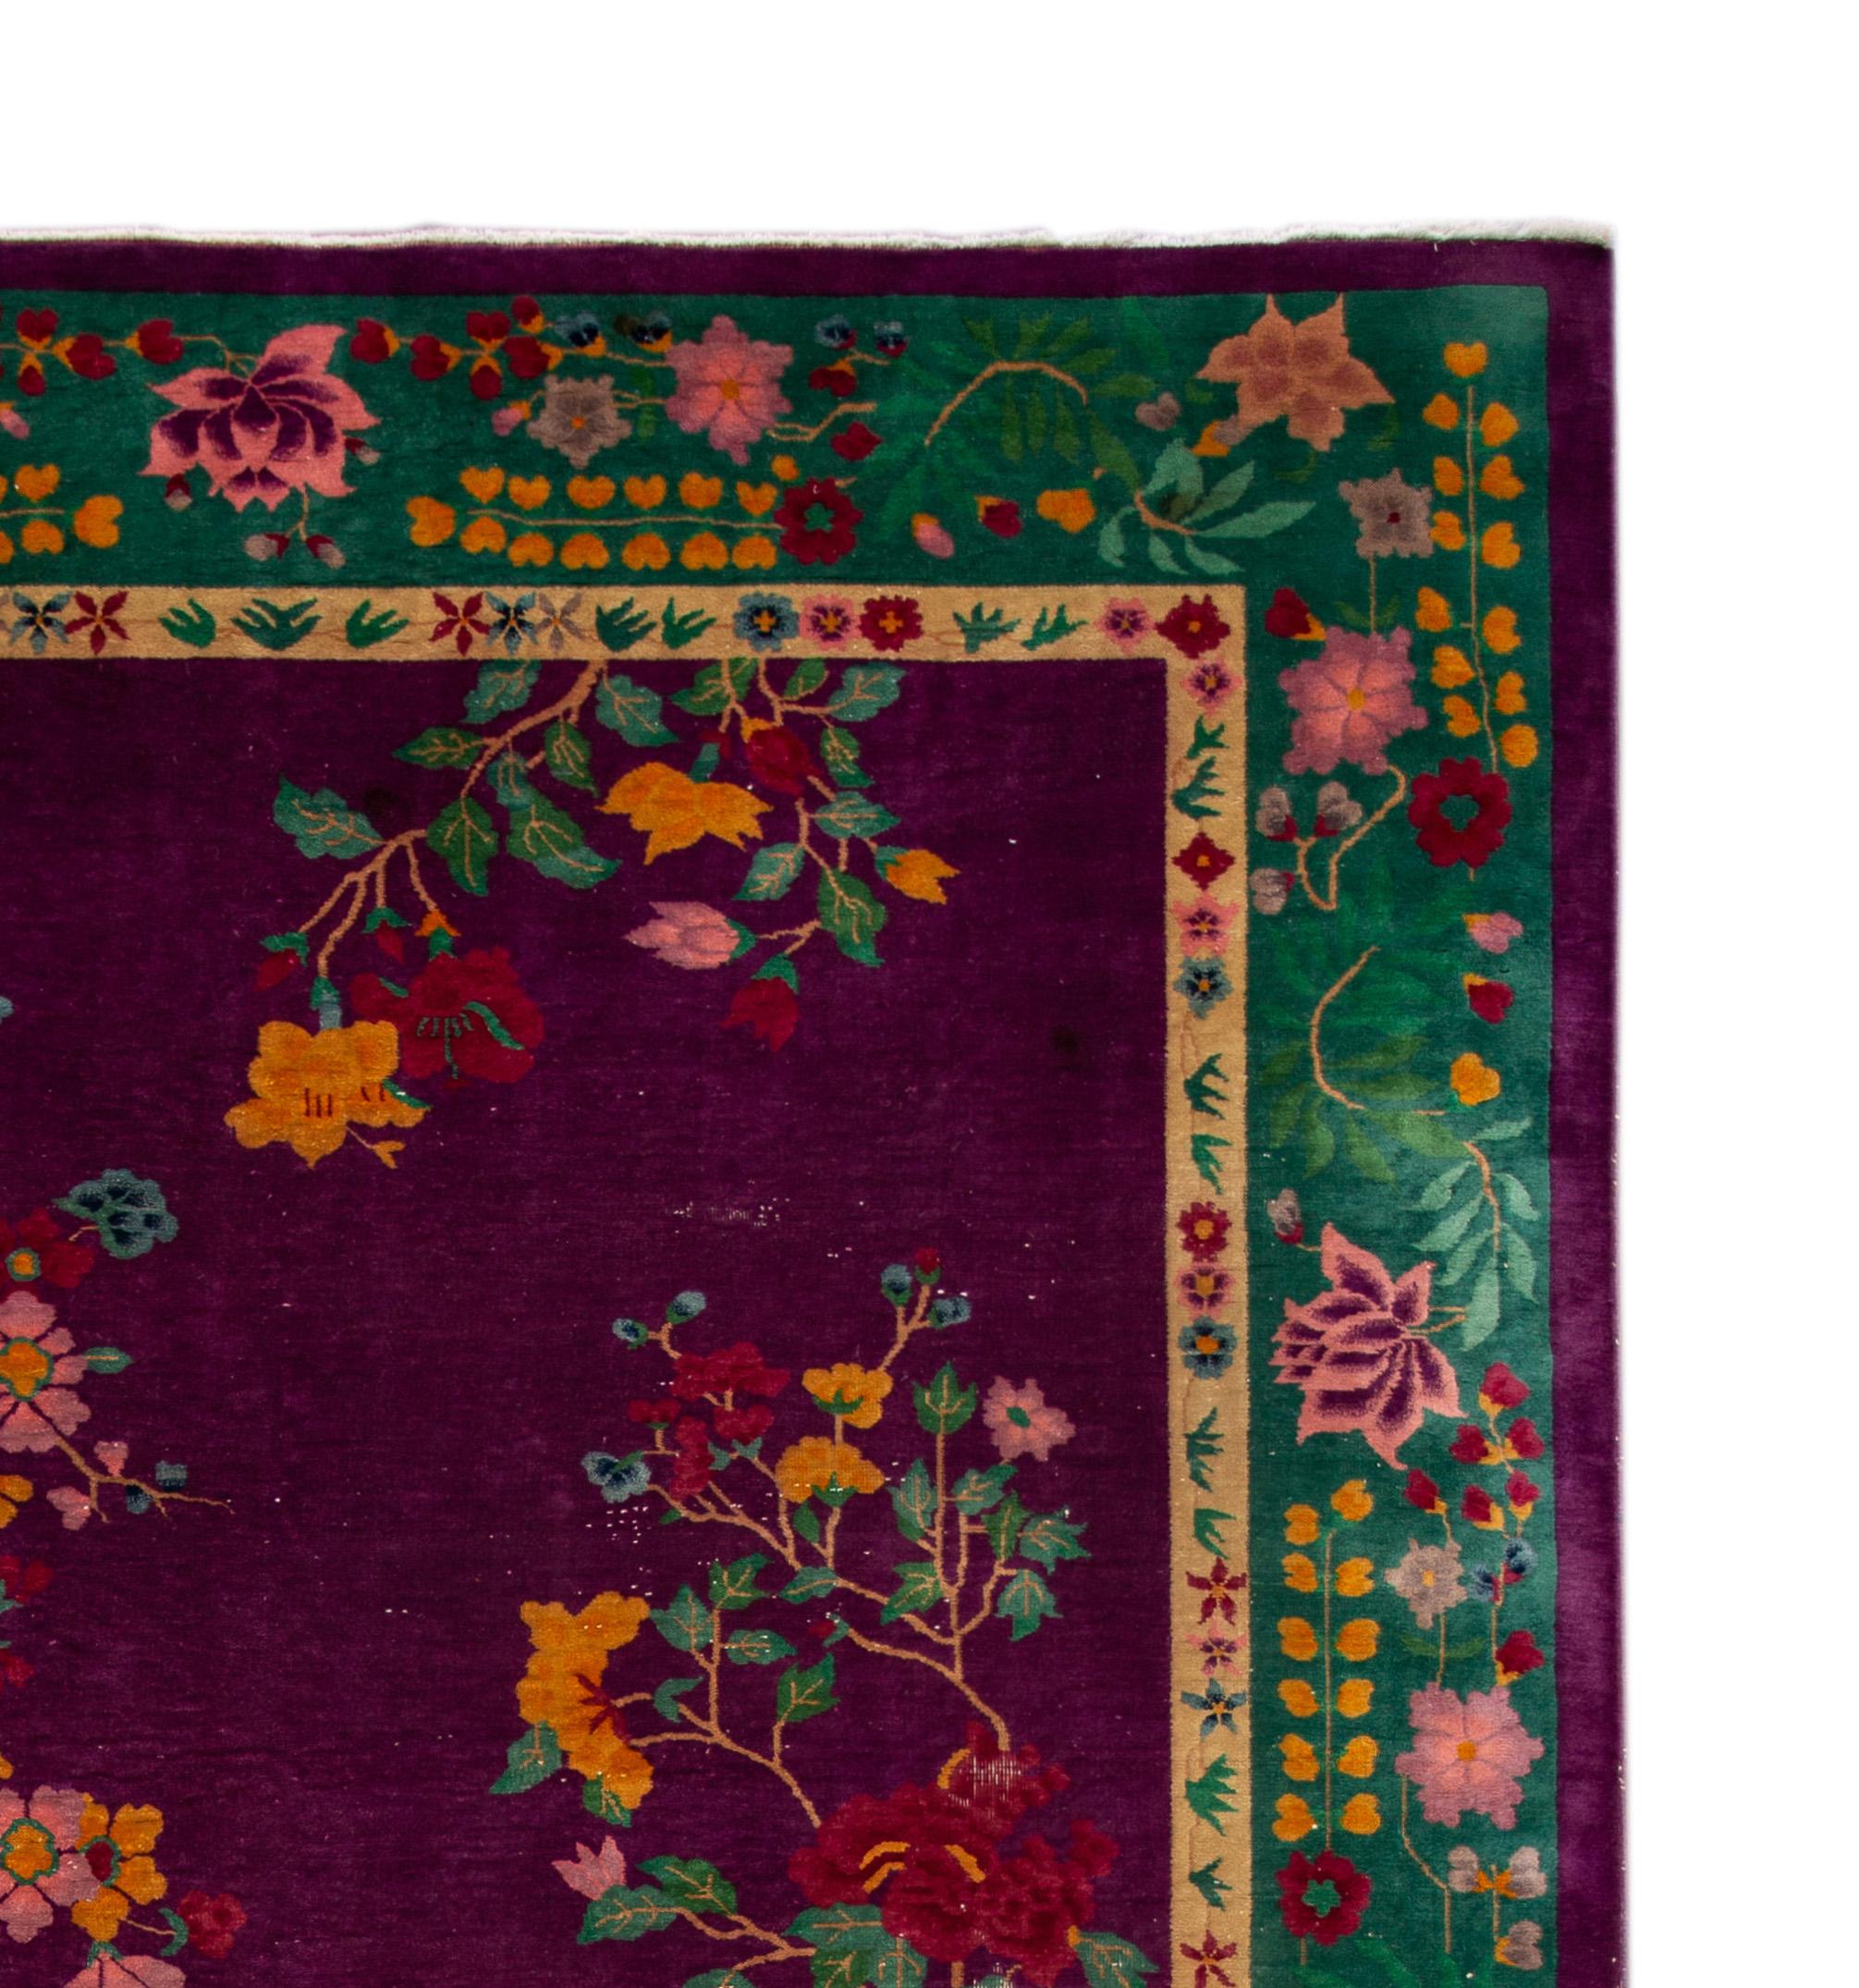 Antique Purple Art Deco Chinese Rug 8 Ft 9 In X 14 Ft 3 In.  In Good Condition For Sale In Norwalk, CT